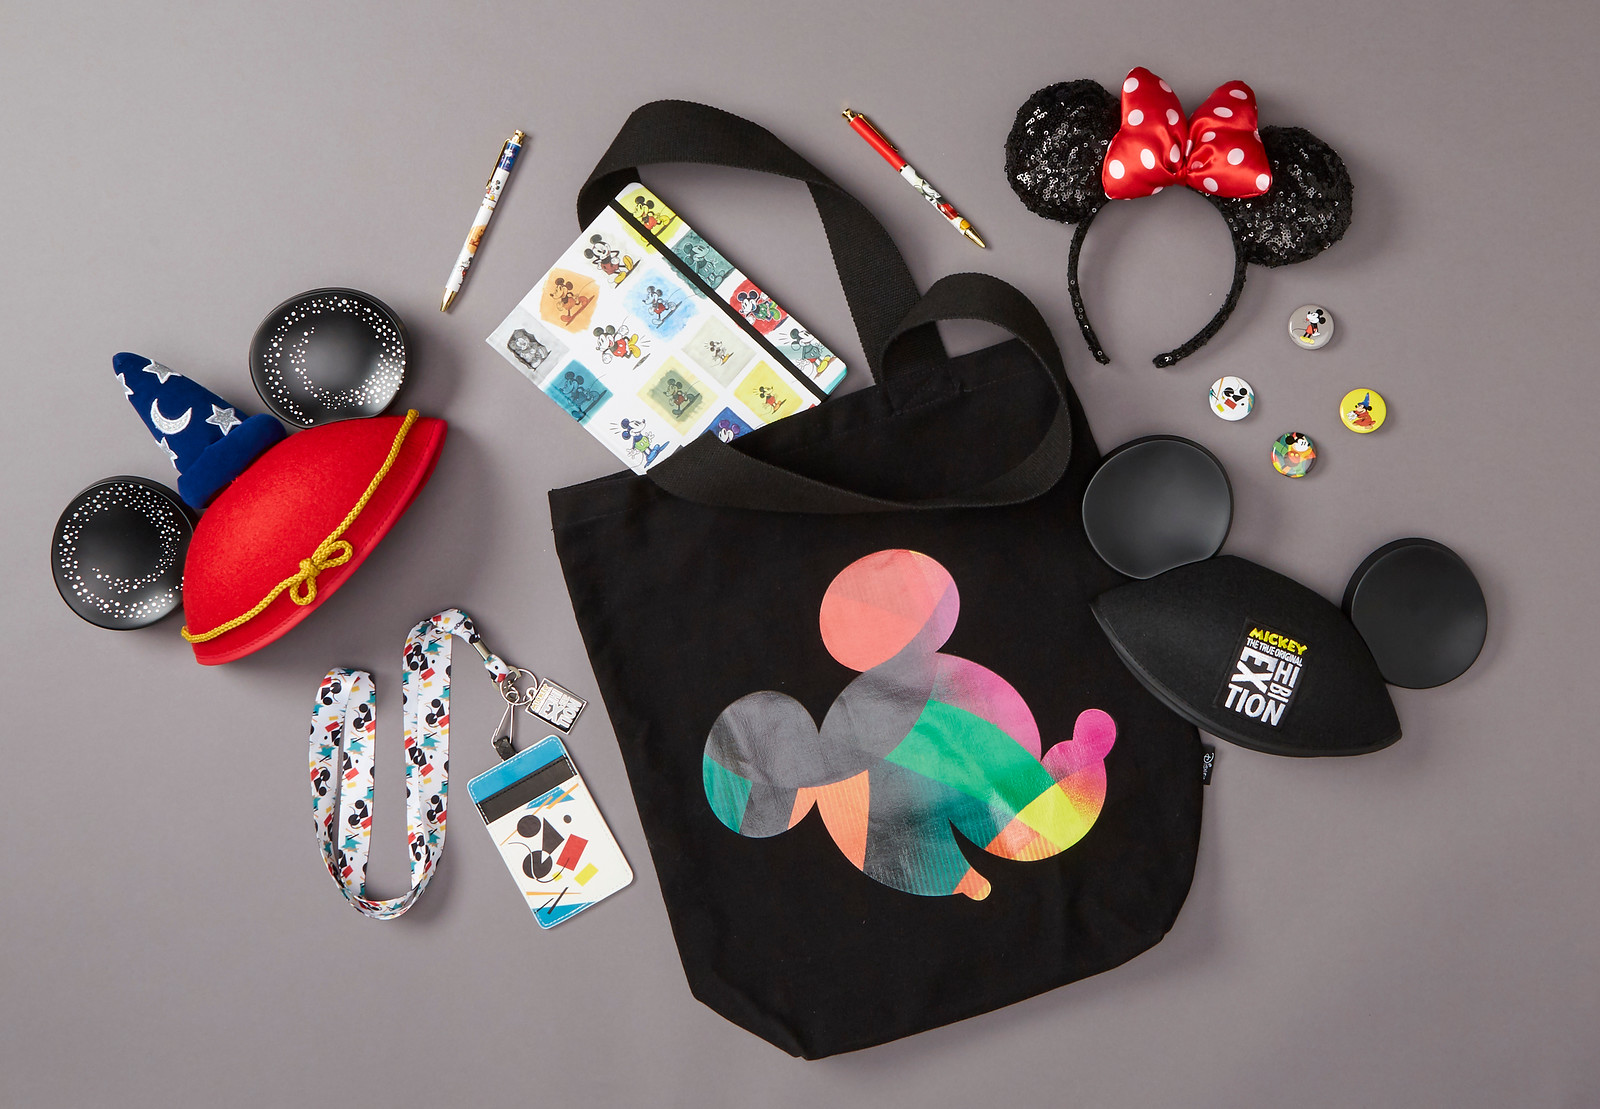 Commemorative, Limited-Edition Merchandise Revealed for ‘Mickey: The True Original Exhibition’ Opening November 8 in New York City